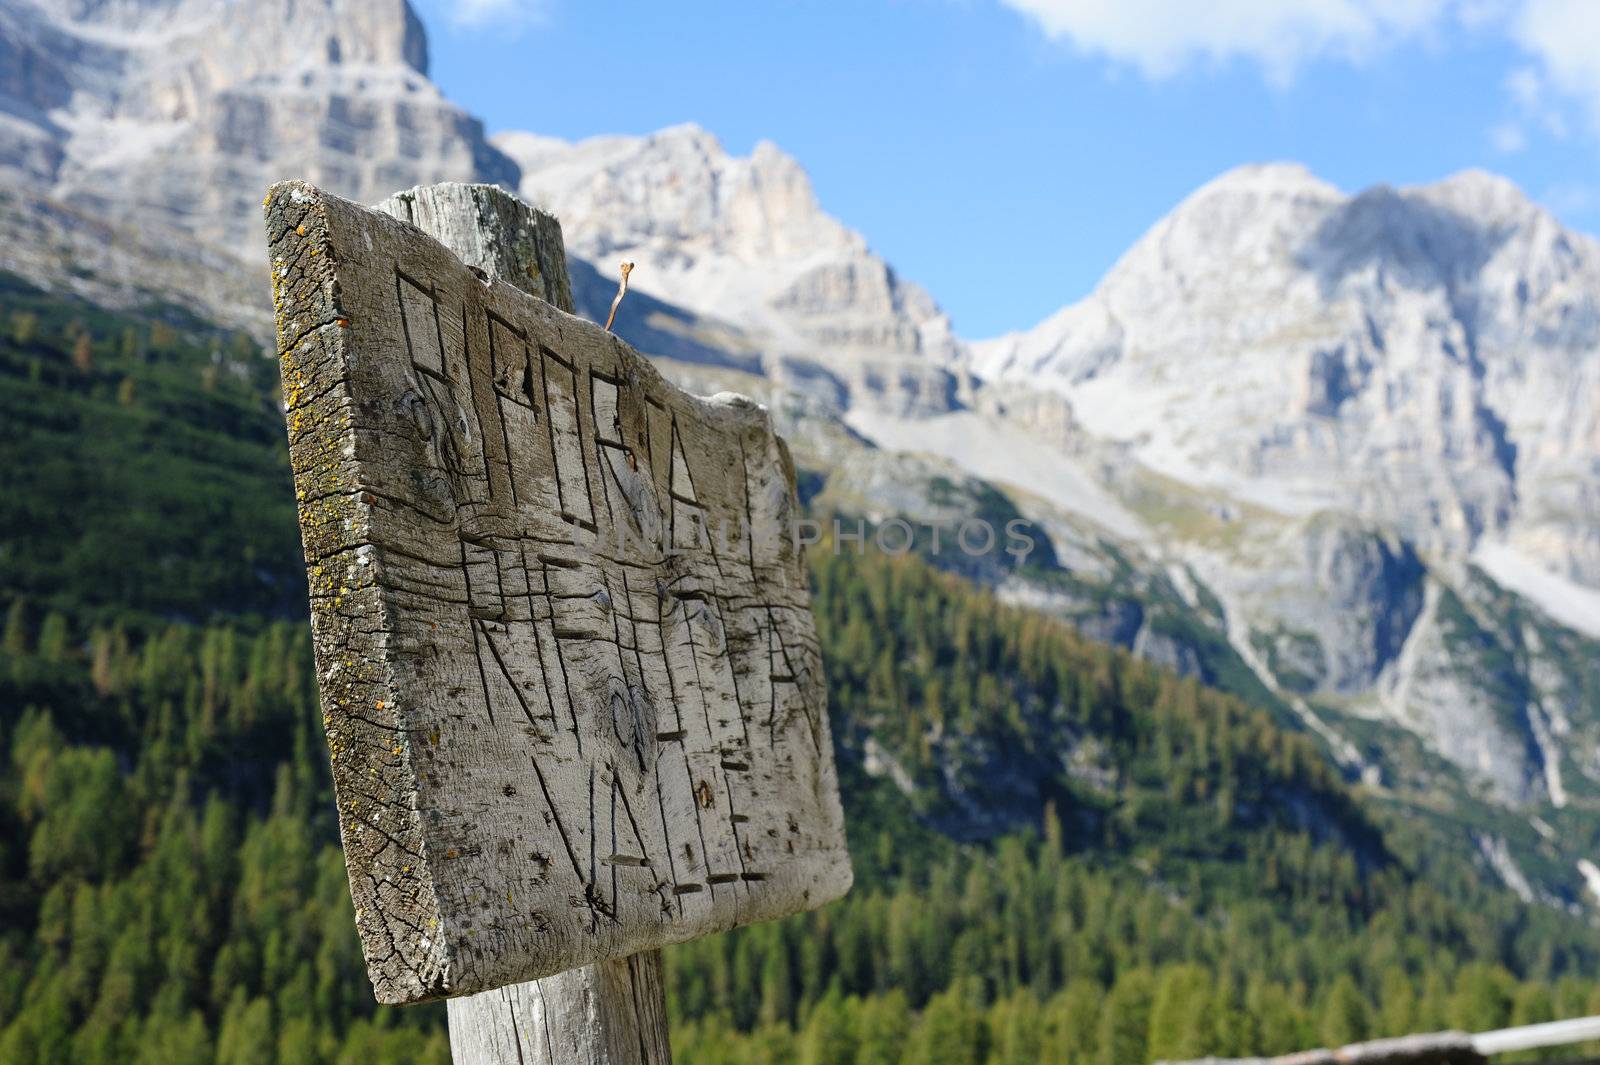 An image of a wwoden sign, rocky mountains and green wood